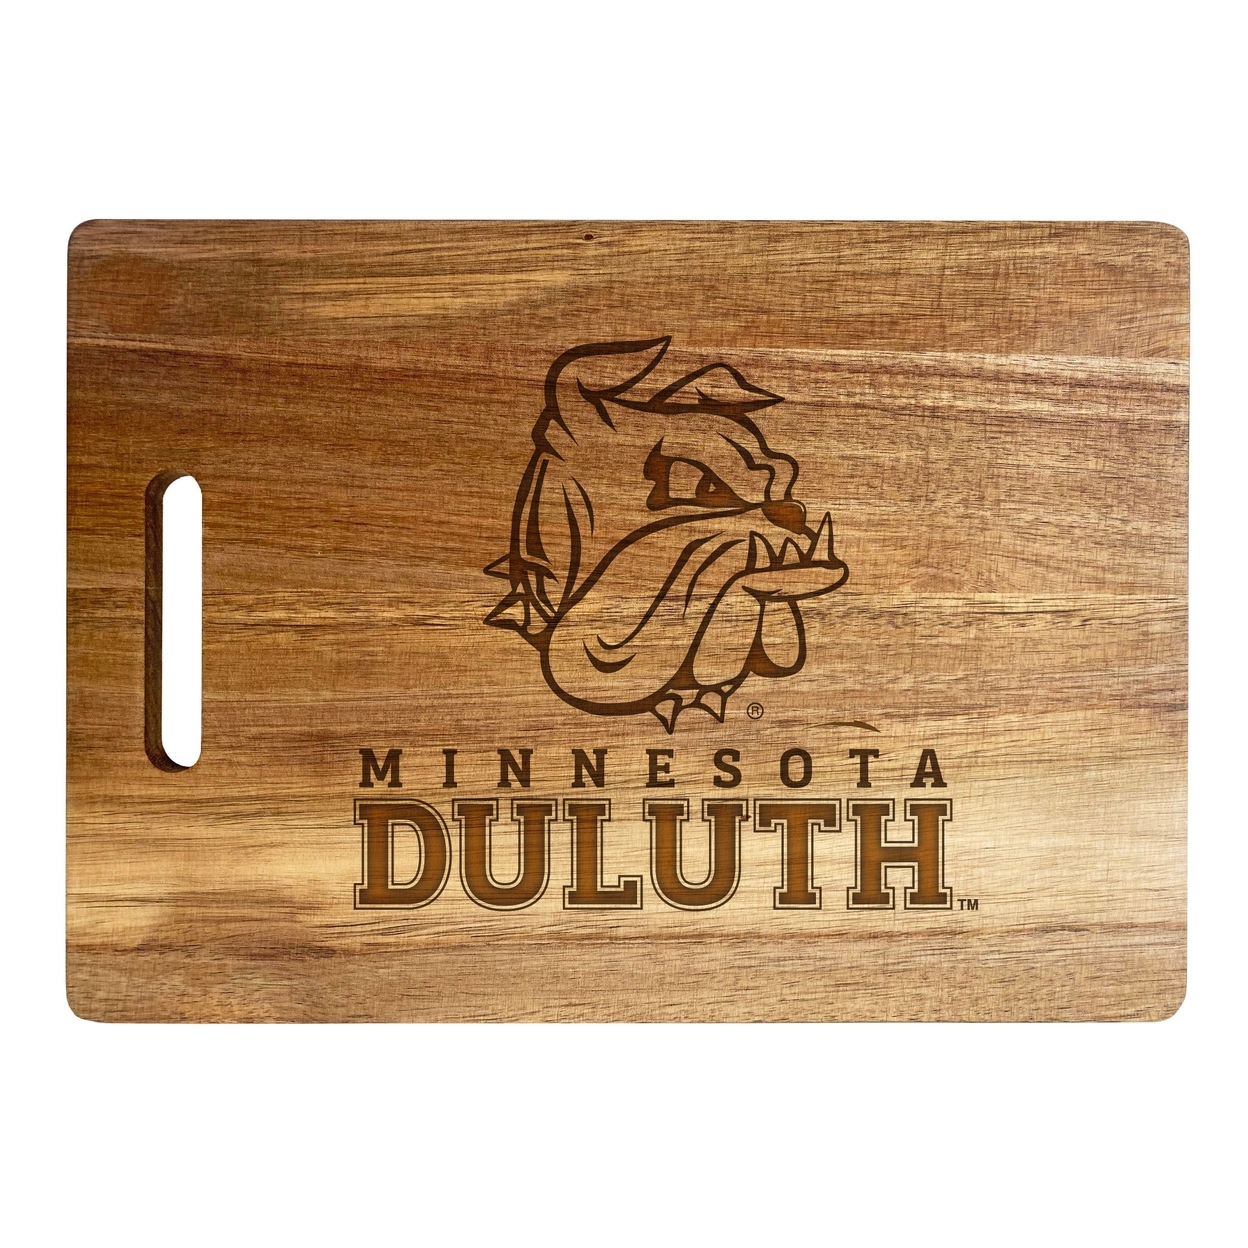 Minnesota Duluth Bulldogs Engraved Wooden Cutting Board 10 X 14 Acacia Wood - Large Engraving